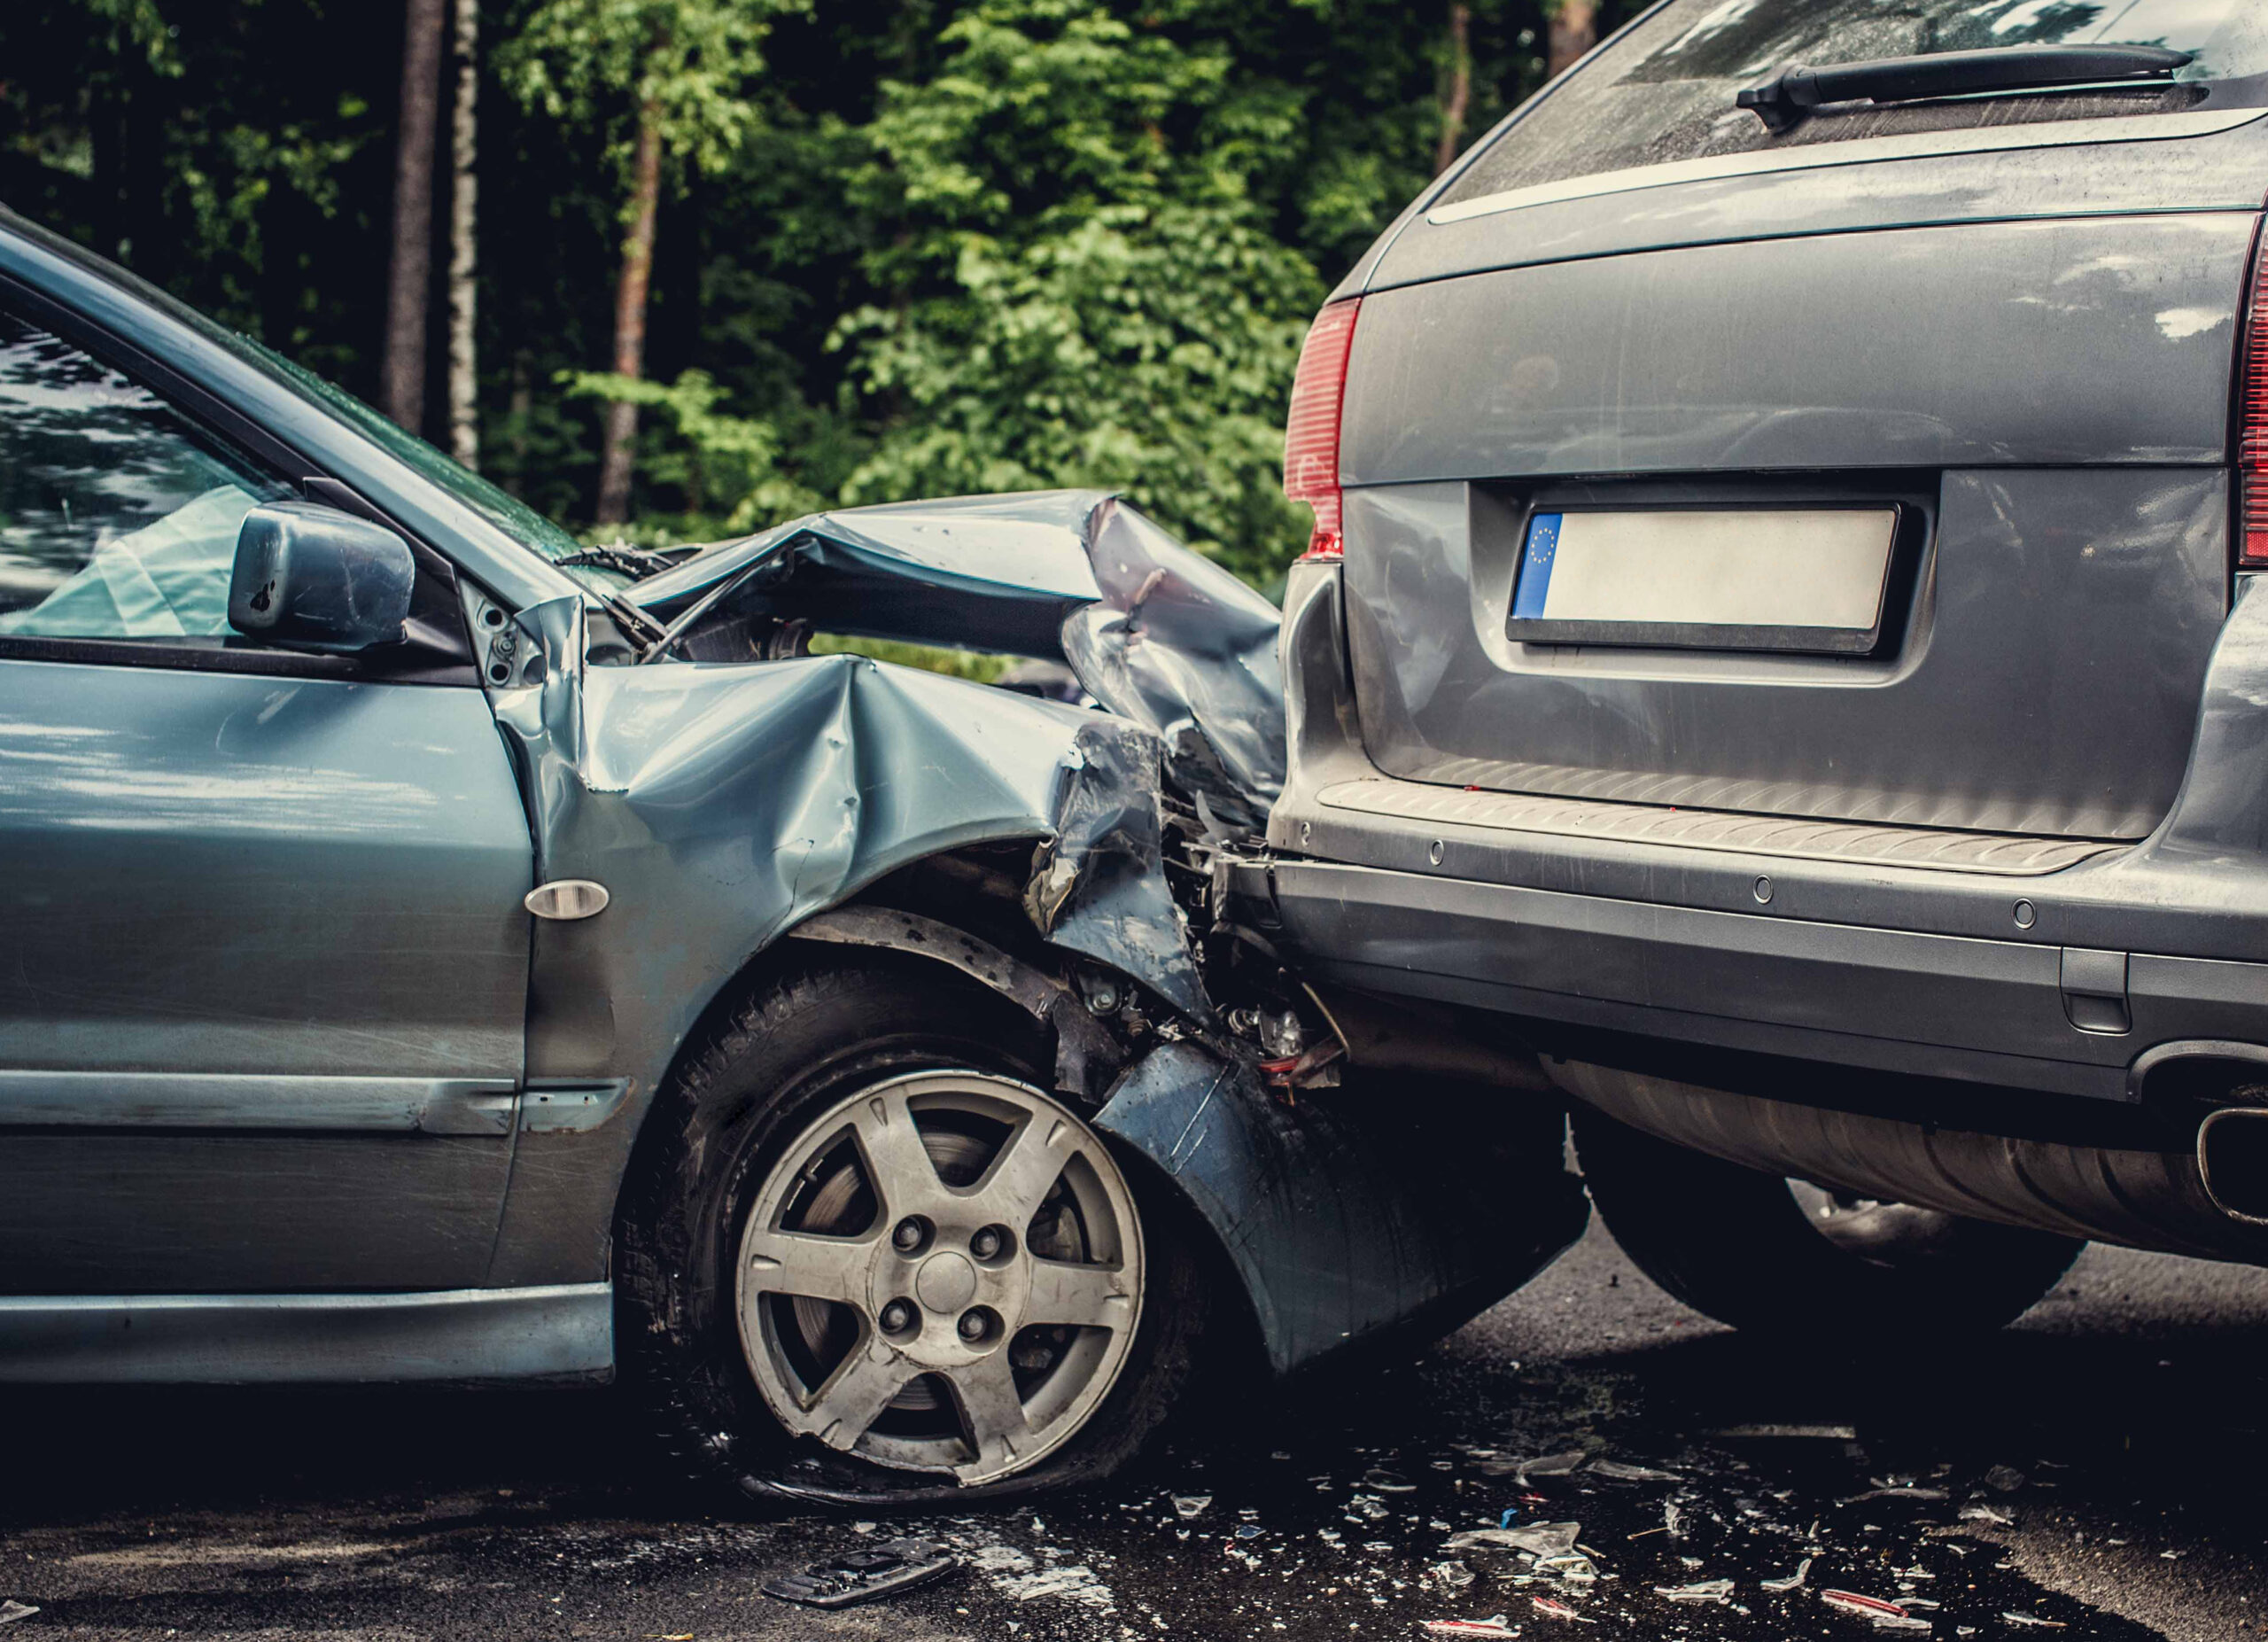 A car accident. The Law Offices of Nicholas a. Parr is the best option for you in cases like this.